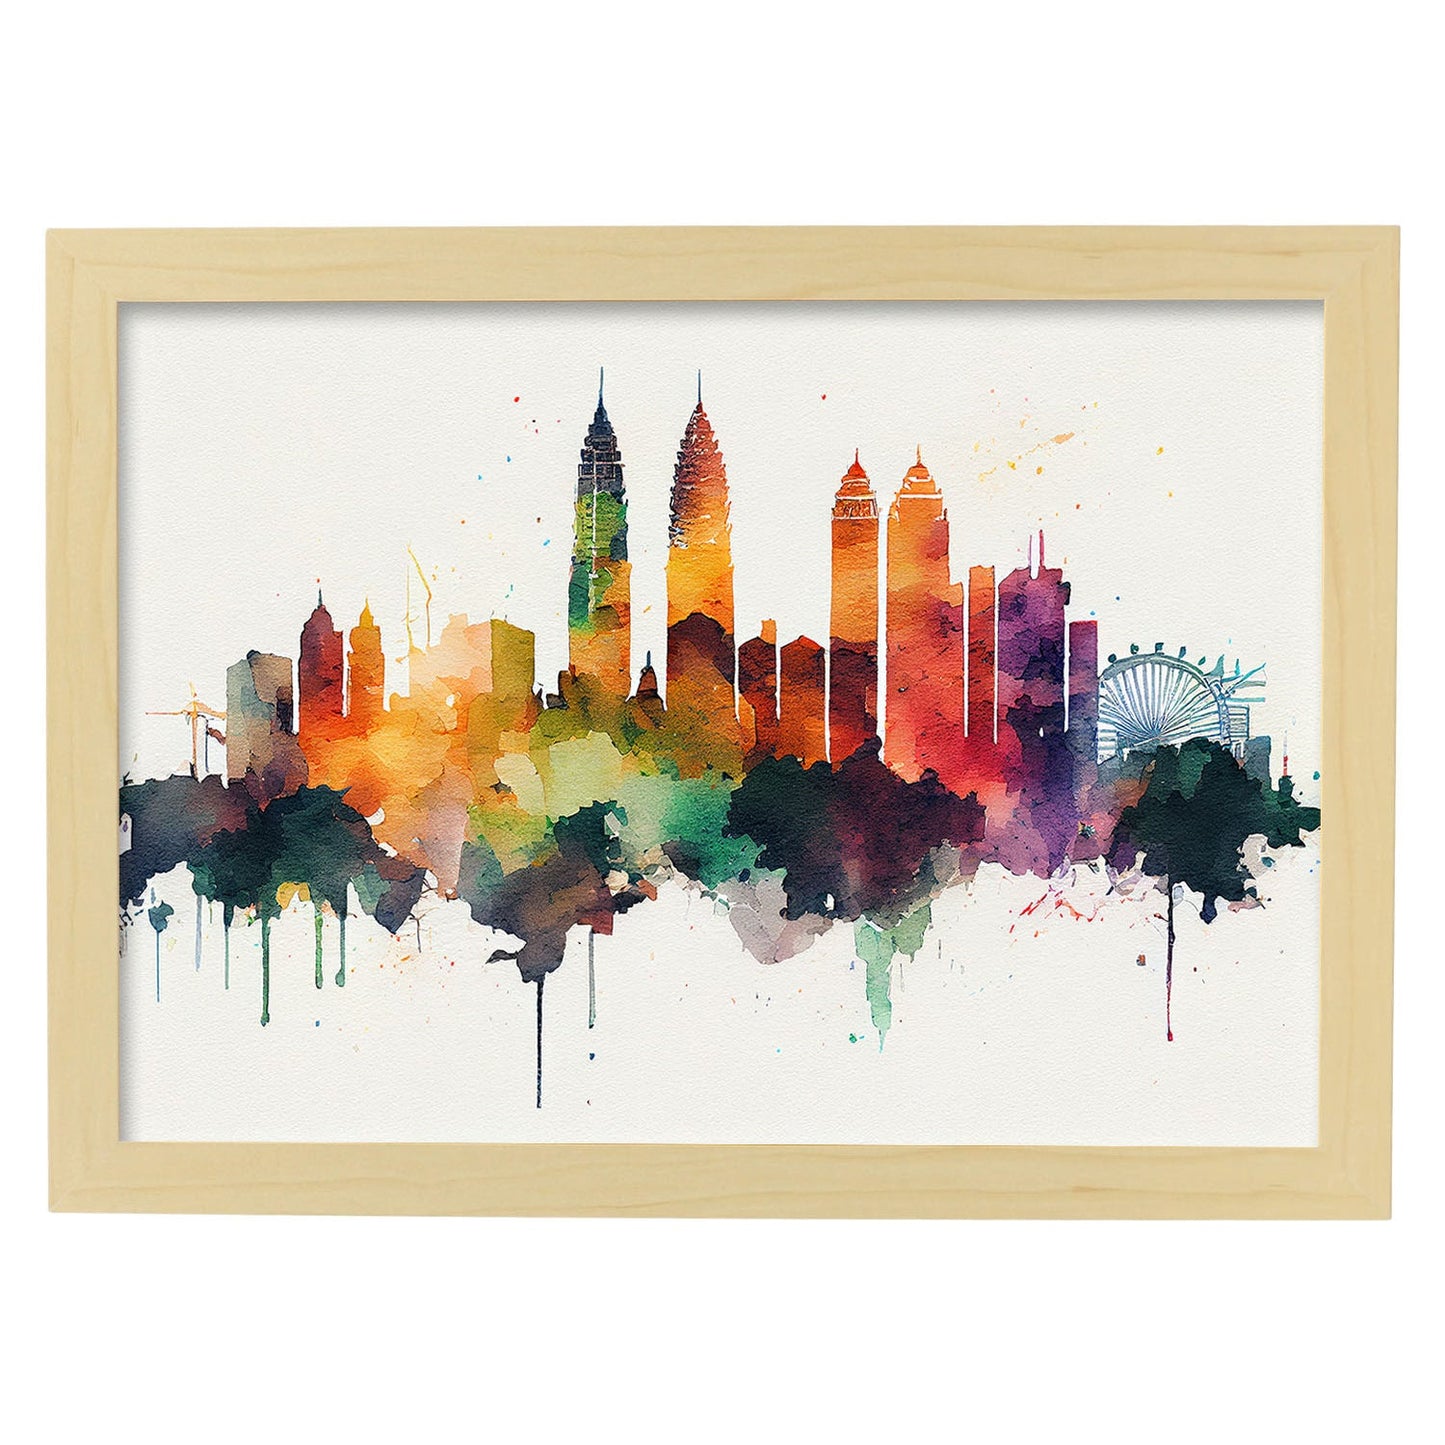 Nacnic watercolor of a skyline of the city of Kuala Lumpur_3. Aesthetic Wall Art Prints for Bedroom or Living Room Design.-Artwork-Nacnic-A4-Marco Madera Clara-Nacnic Estudio SL